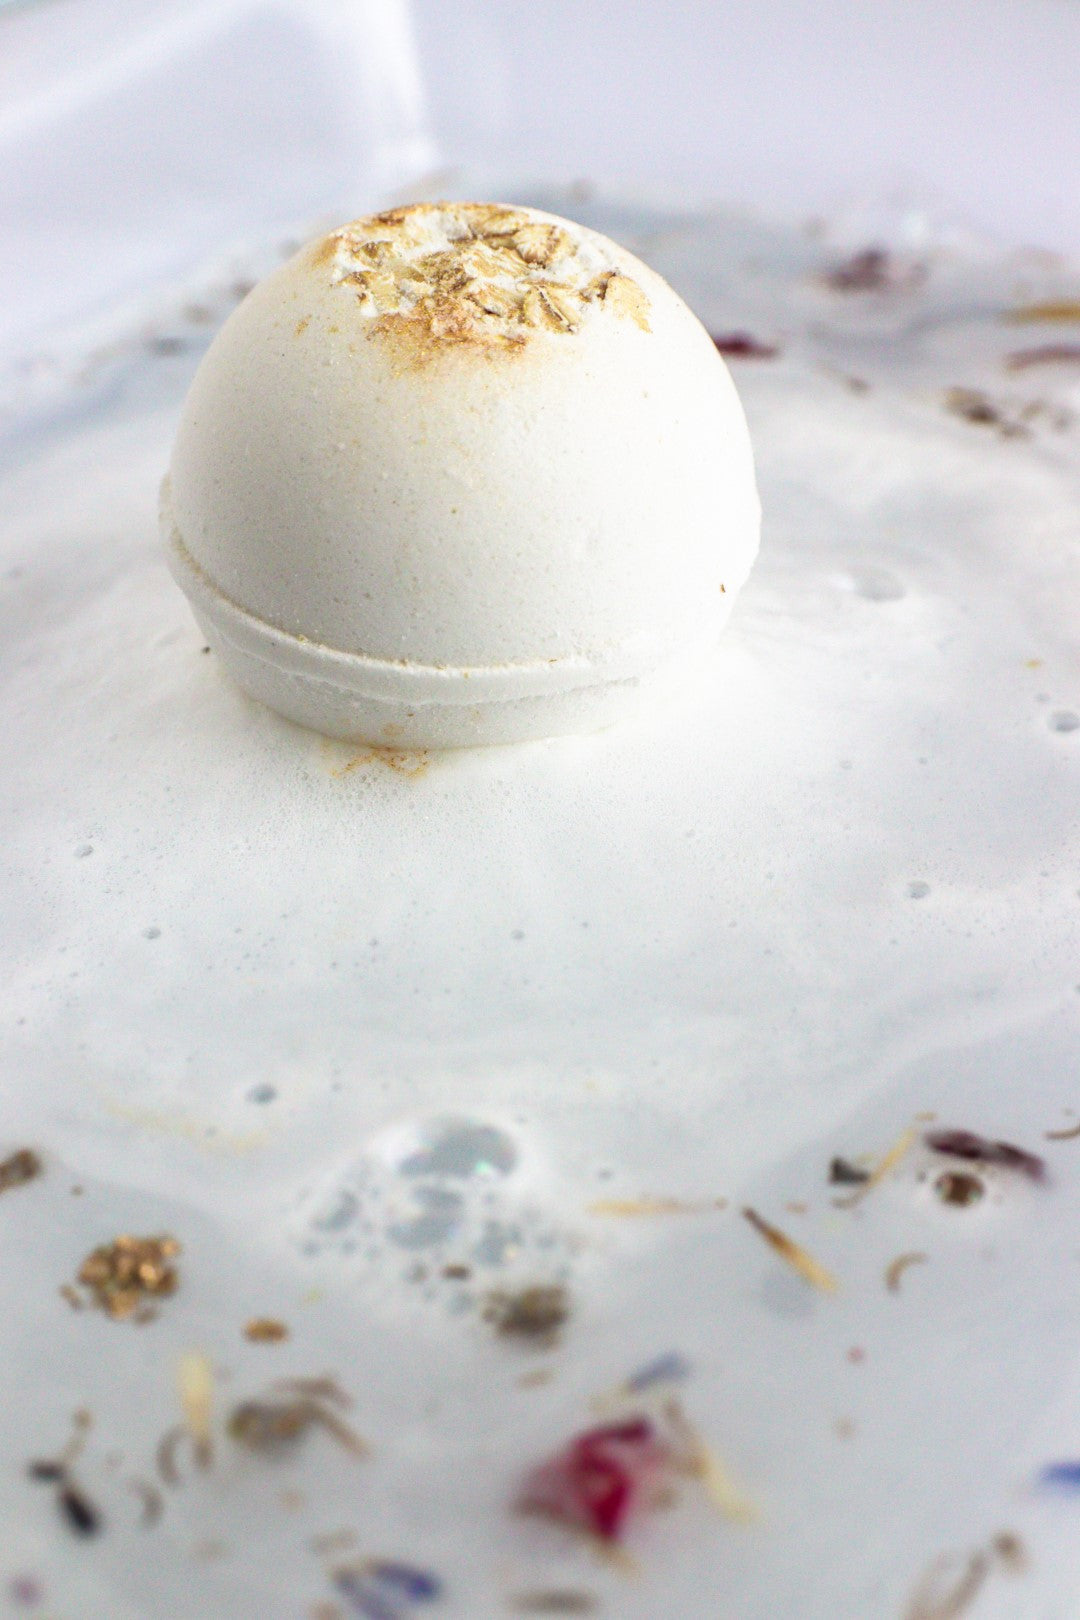 Bath bomb Dreamwithus made of honey and oatmeal